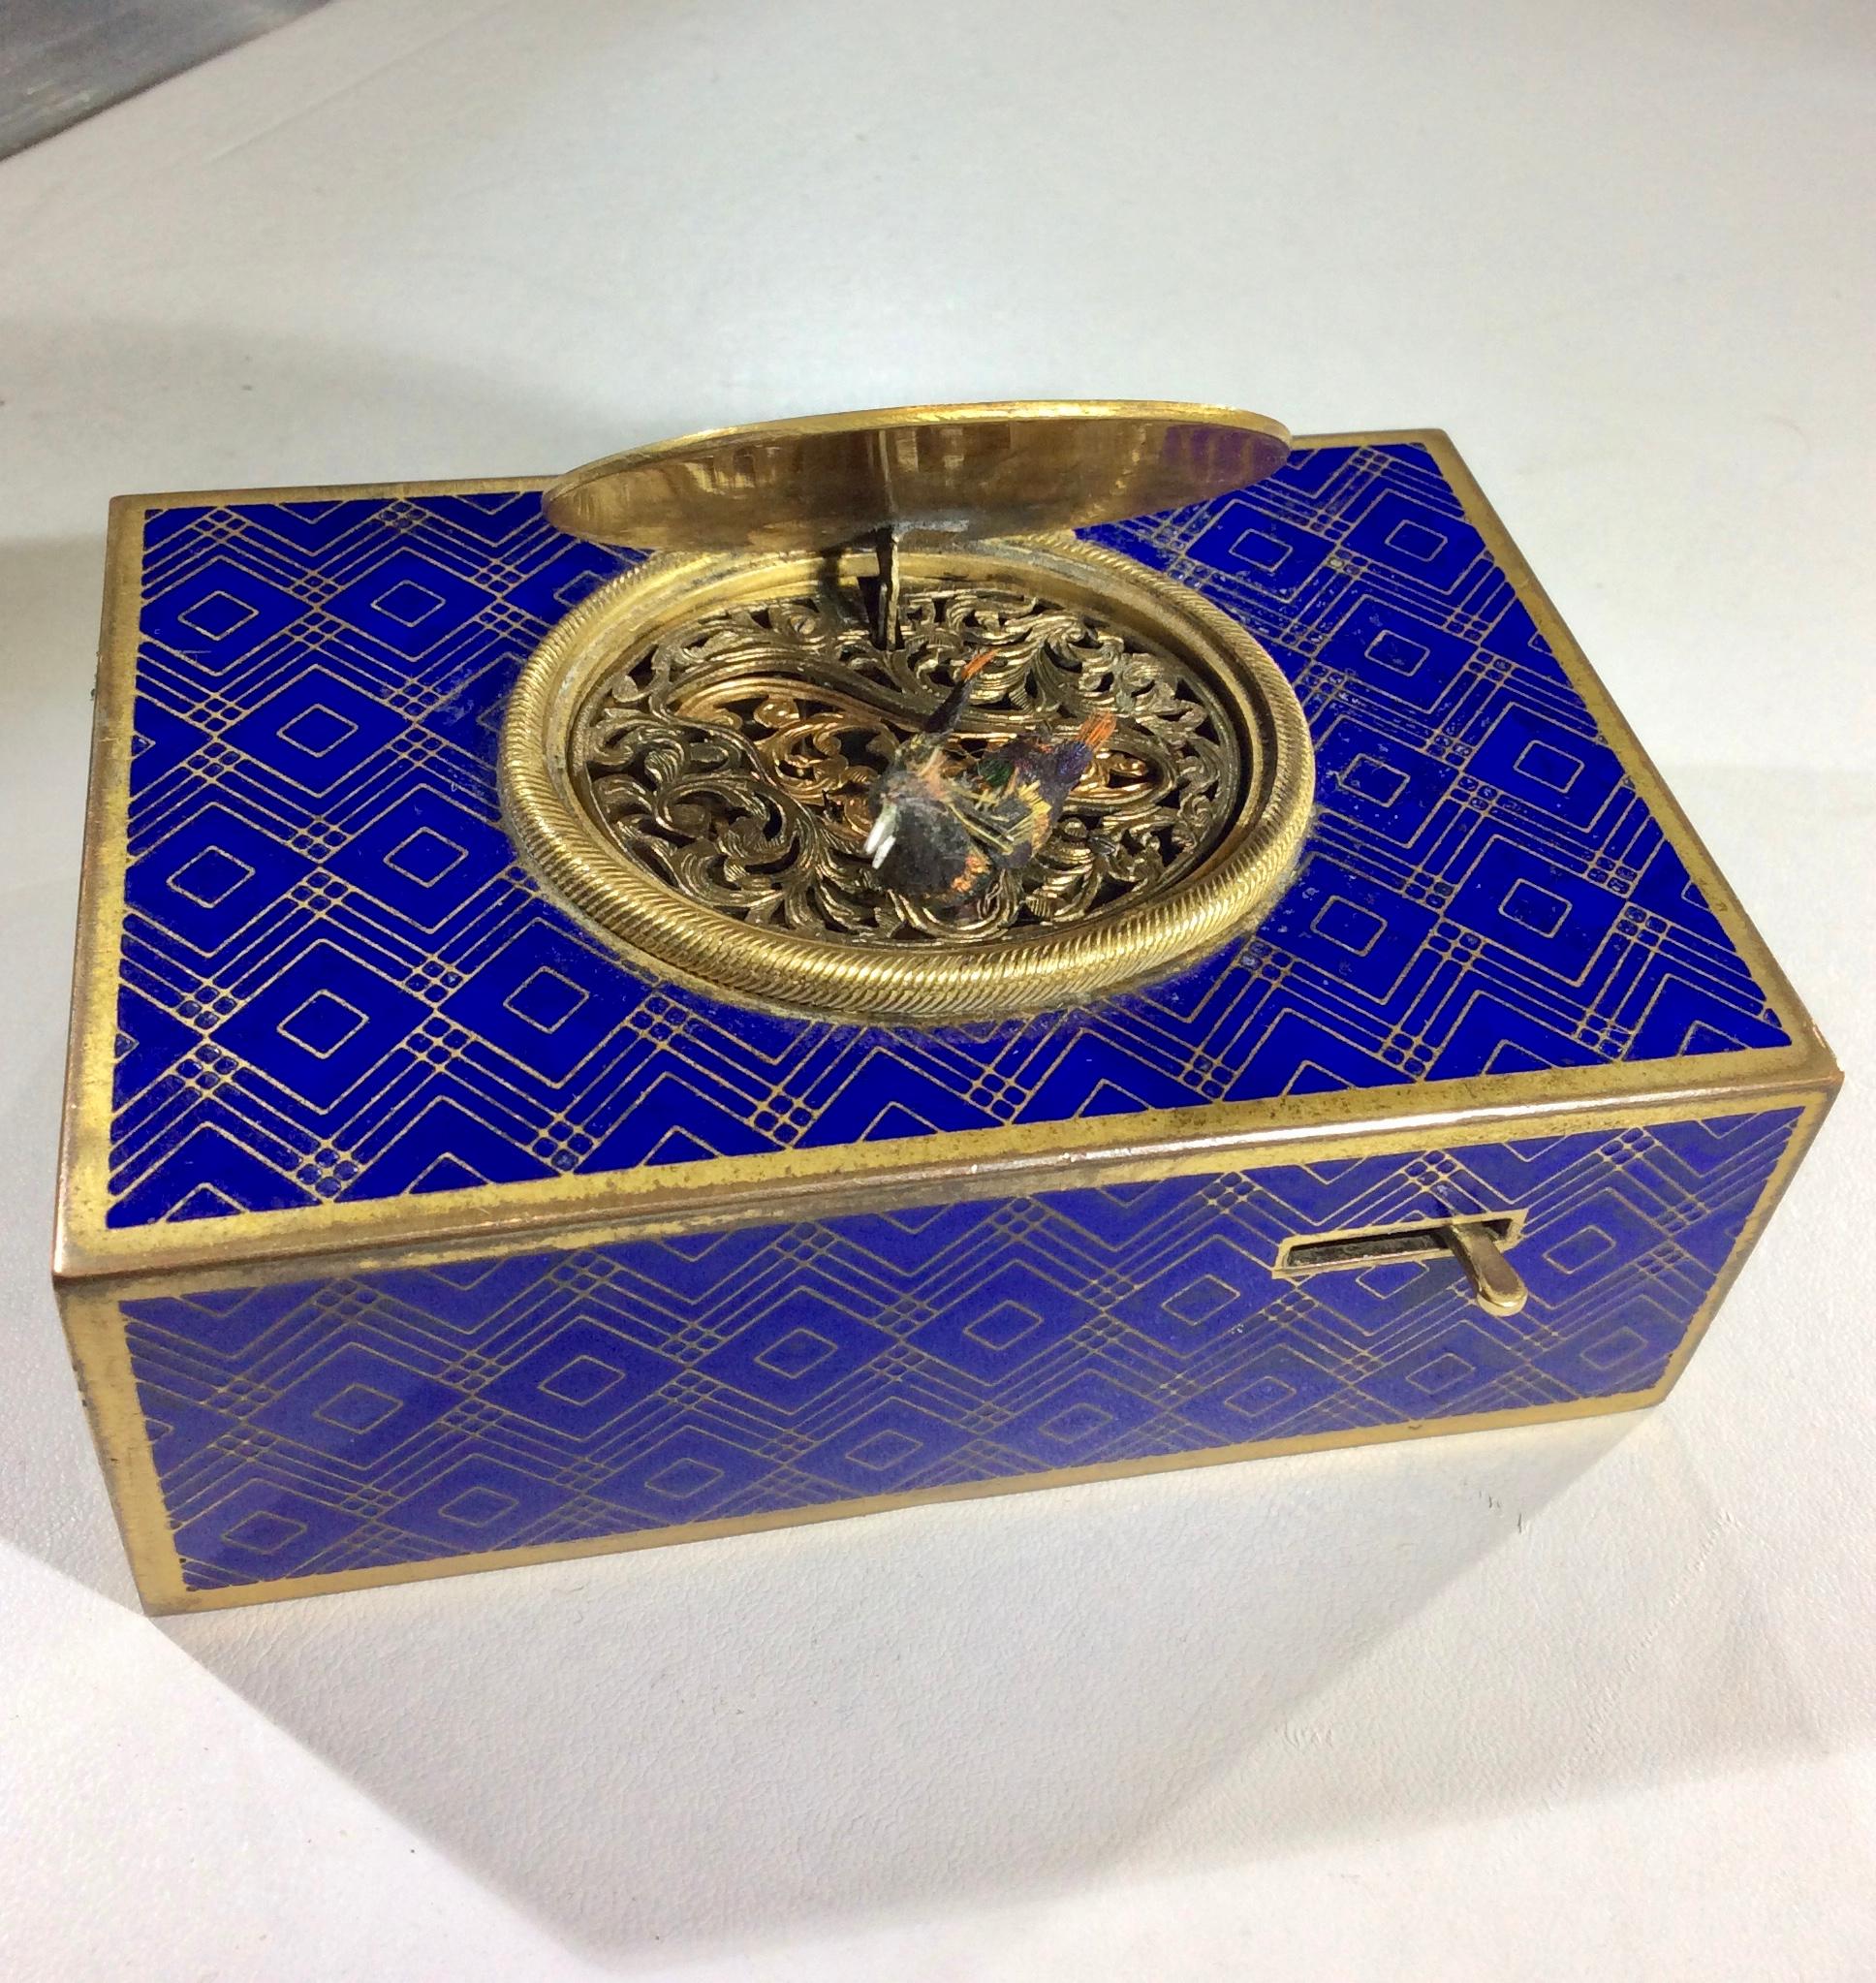 A bronze Swiss blue enamel automation bird singing box. The bird has beautiful multicolored plumage and when wound it moves its beak, flaps both wings, bobs tailfeather and turns entire body from side-to-side to the perfectly continuous synchronized